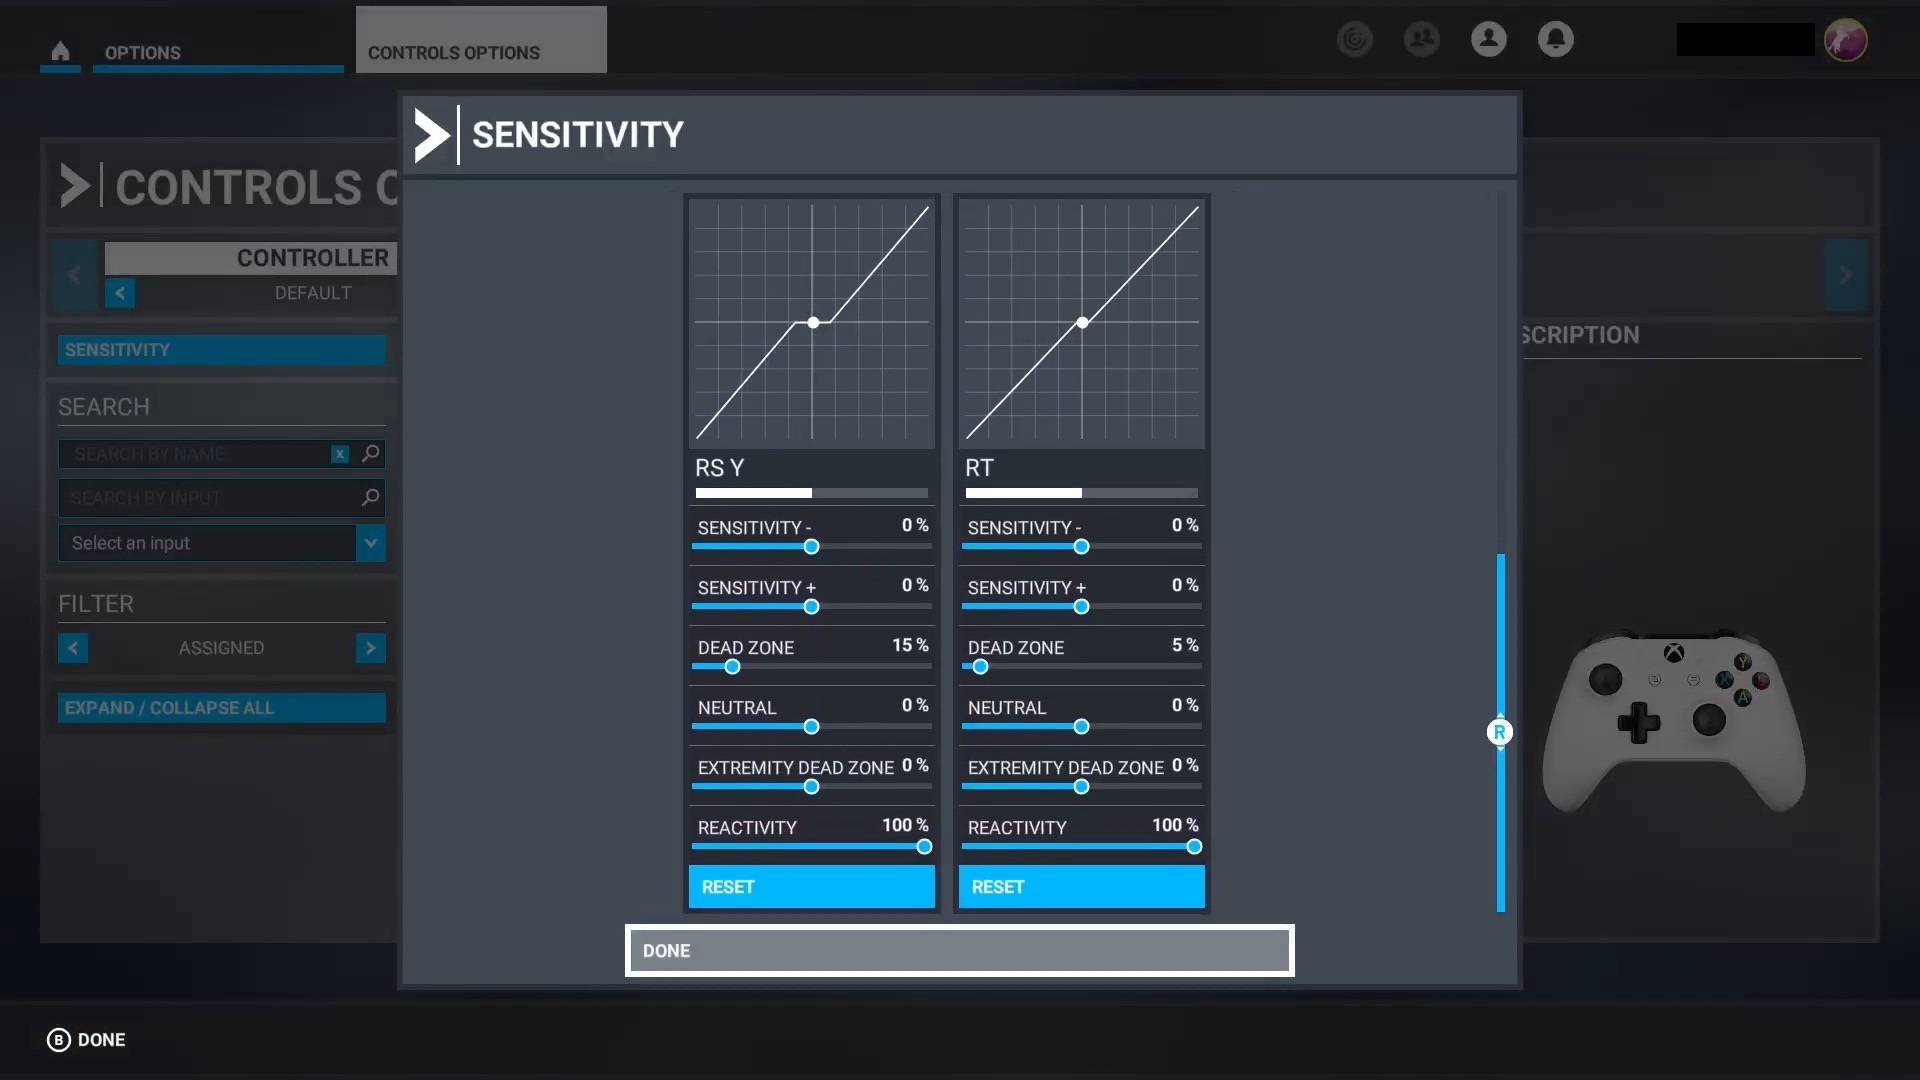 Screenshot of Flight Simulator Controls Options with Sensitivity section shown.  Displaying info about RS Y and RT.